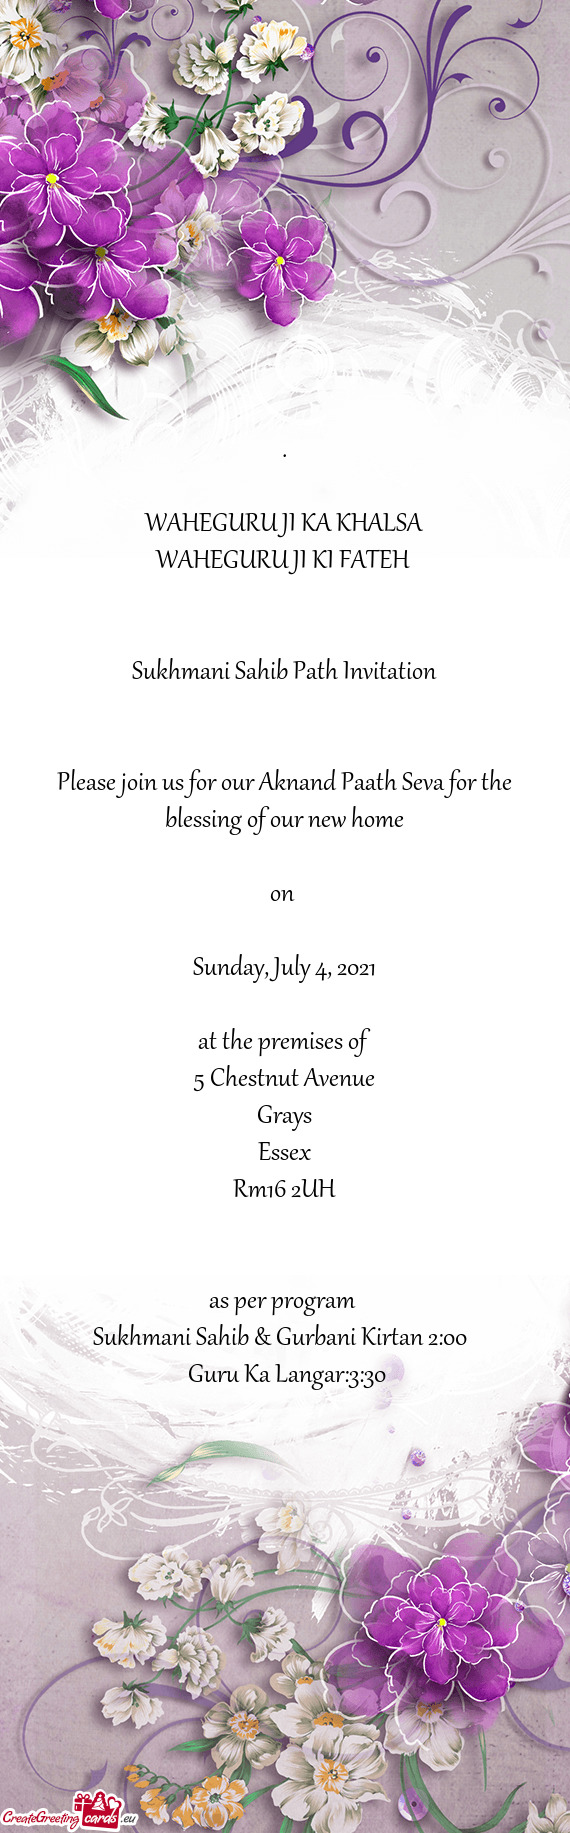 Please join us for our Aknand Paath Seva for the blessing of our new home